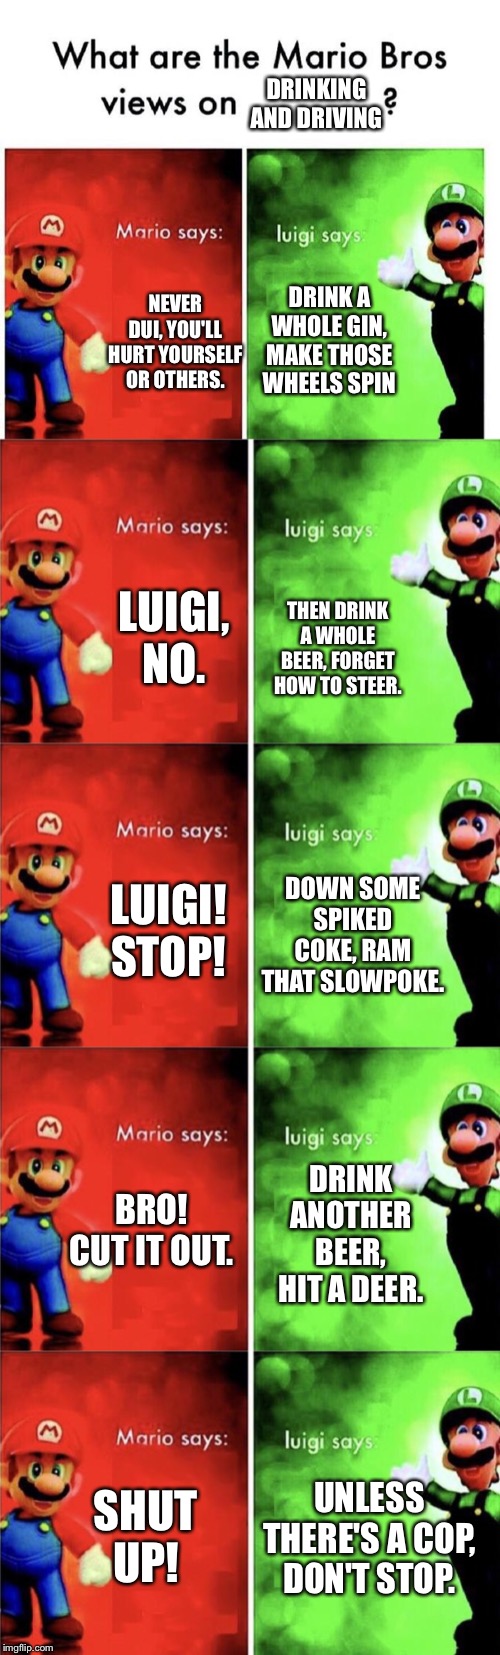 Mario, you joy-killer. |  DRINKING AND DRIVING; DRINK A WHOLE GIN, MAKE THOSE WHEELS SPIN; NEVER DUI, YOU'LL HURT YOURSELF OR OTHERS. THEN DRINK A WHOLE BEER, FORGET HOW TO STEER. LUIGI, NO. DOWN SOME SPIKED COKE, RAM THAT SLOWPOKE. LUIGI! STOP! DRINK ANOTHER BEER, HIT A DEER. BRO! CUT IT OUT. SHUT UP! UNLESS THERE'S A COP, DON'T STOP. | image tagged in mario bros views,drunk driving,memes,super mario bros,funny,drunk | made w/ Imgflip meme maker